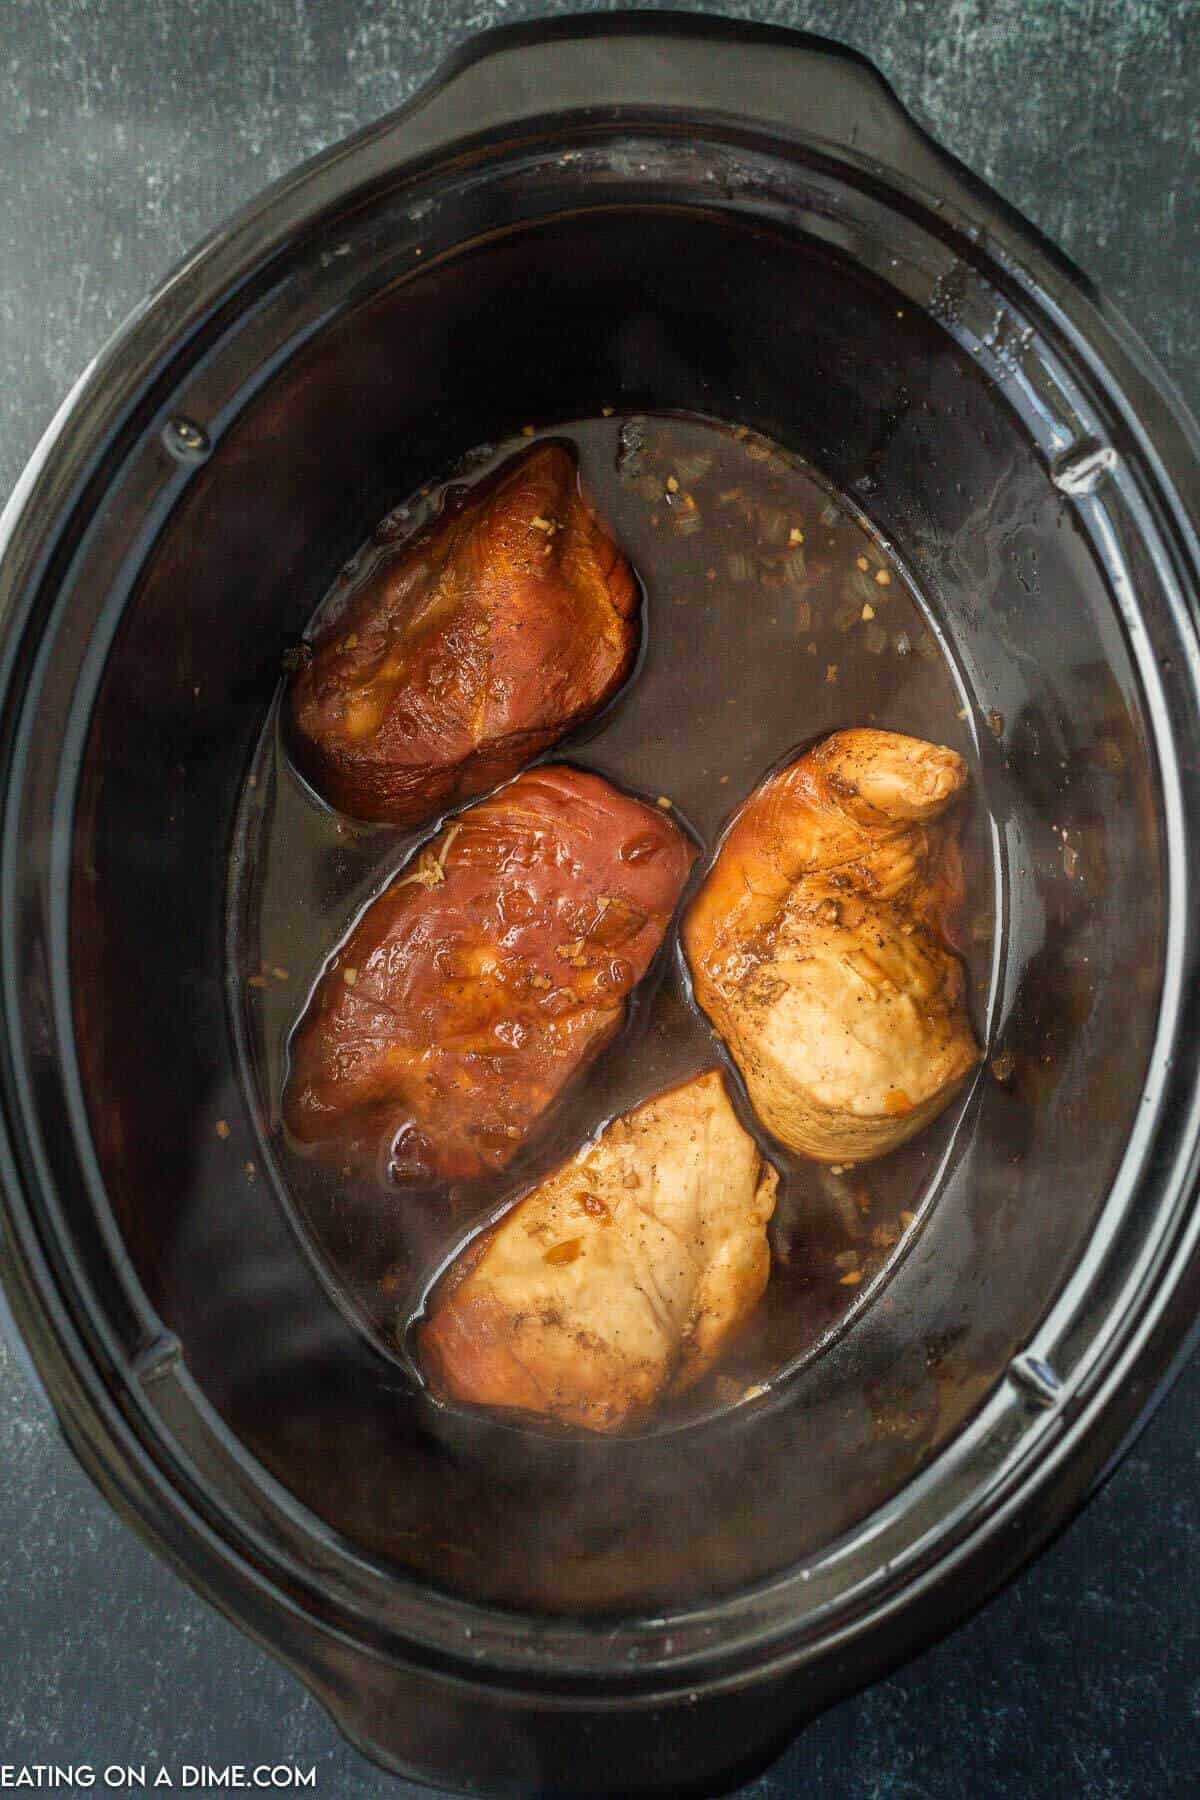 Cooked chicken in the slow cooker